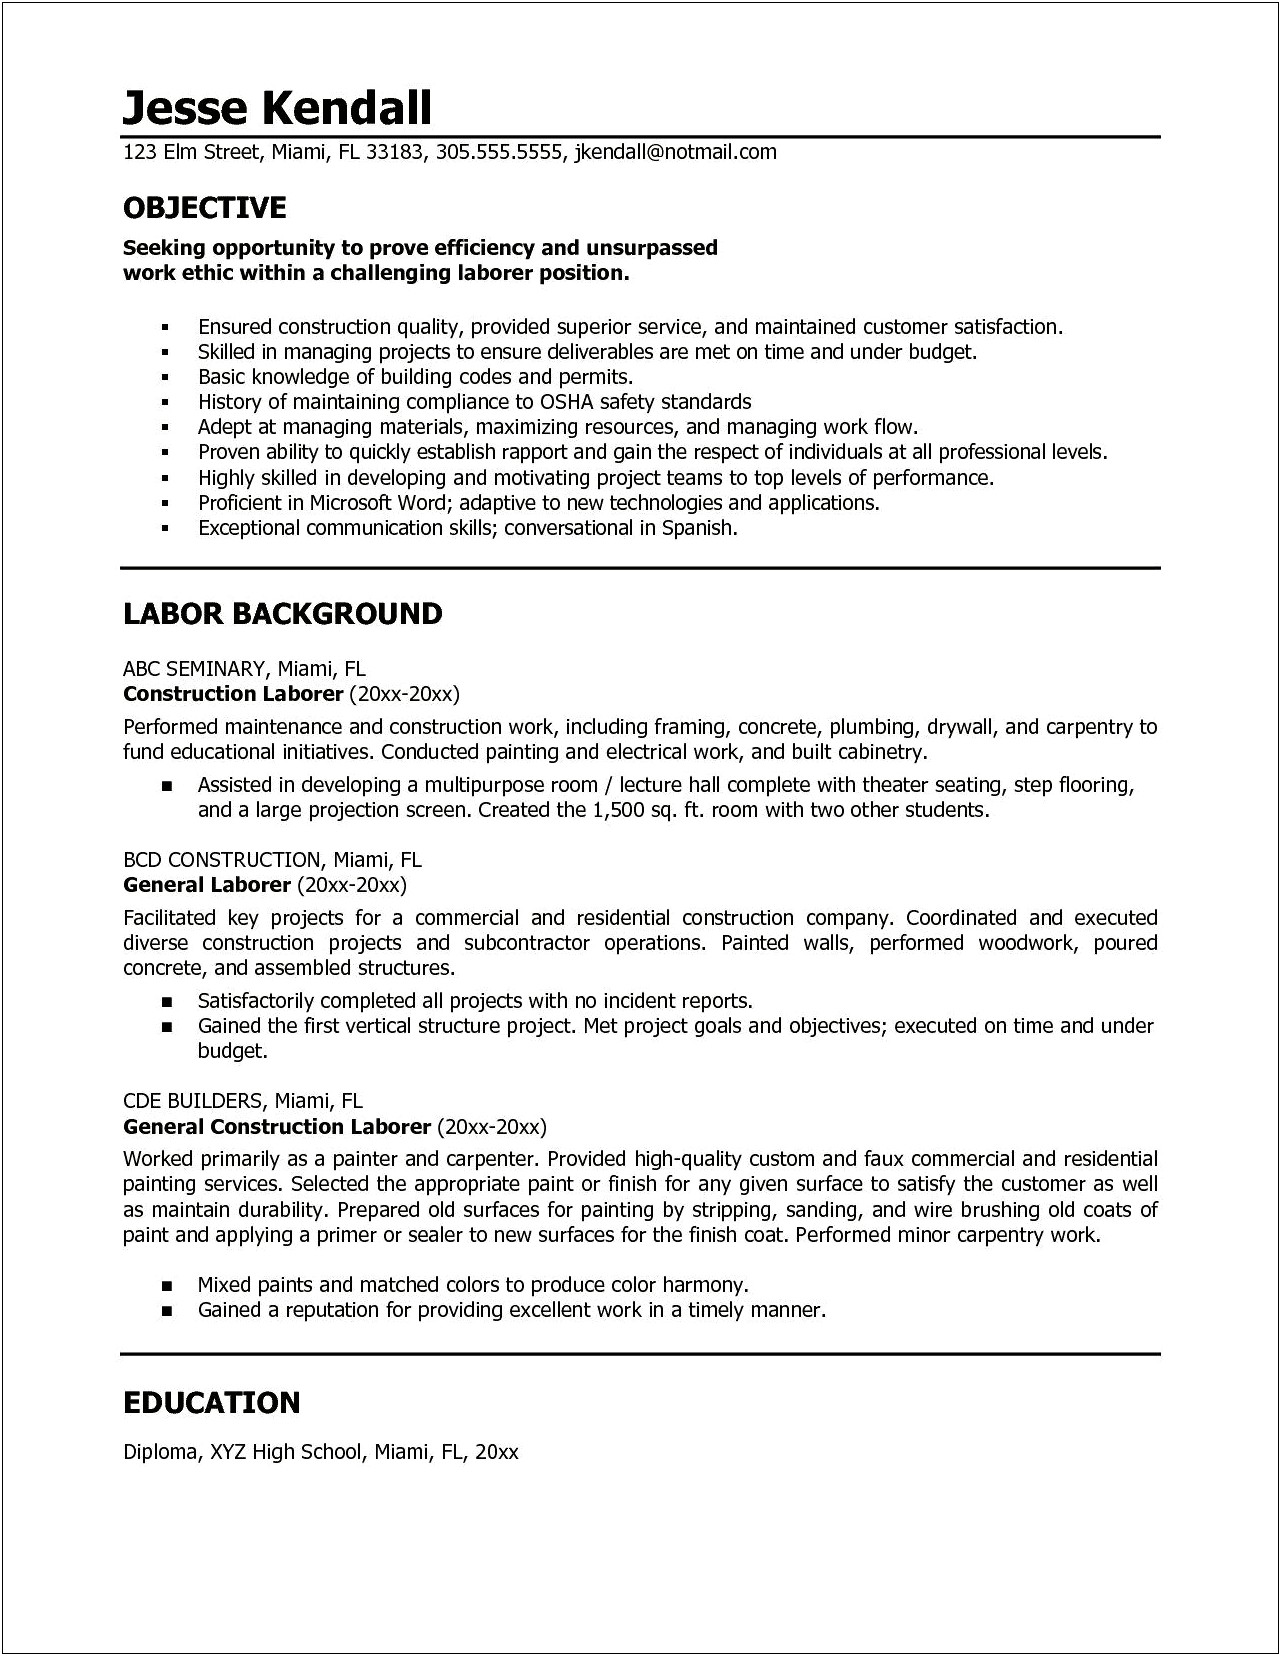 General Resume Objective Examples For Freshers